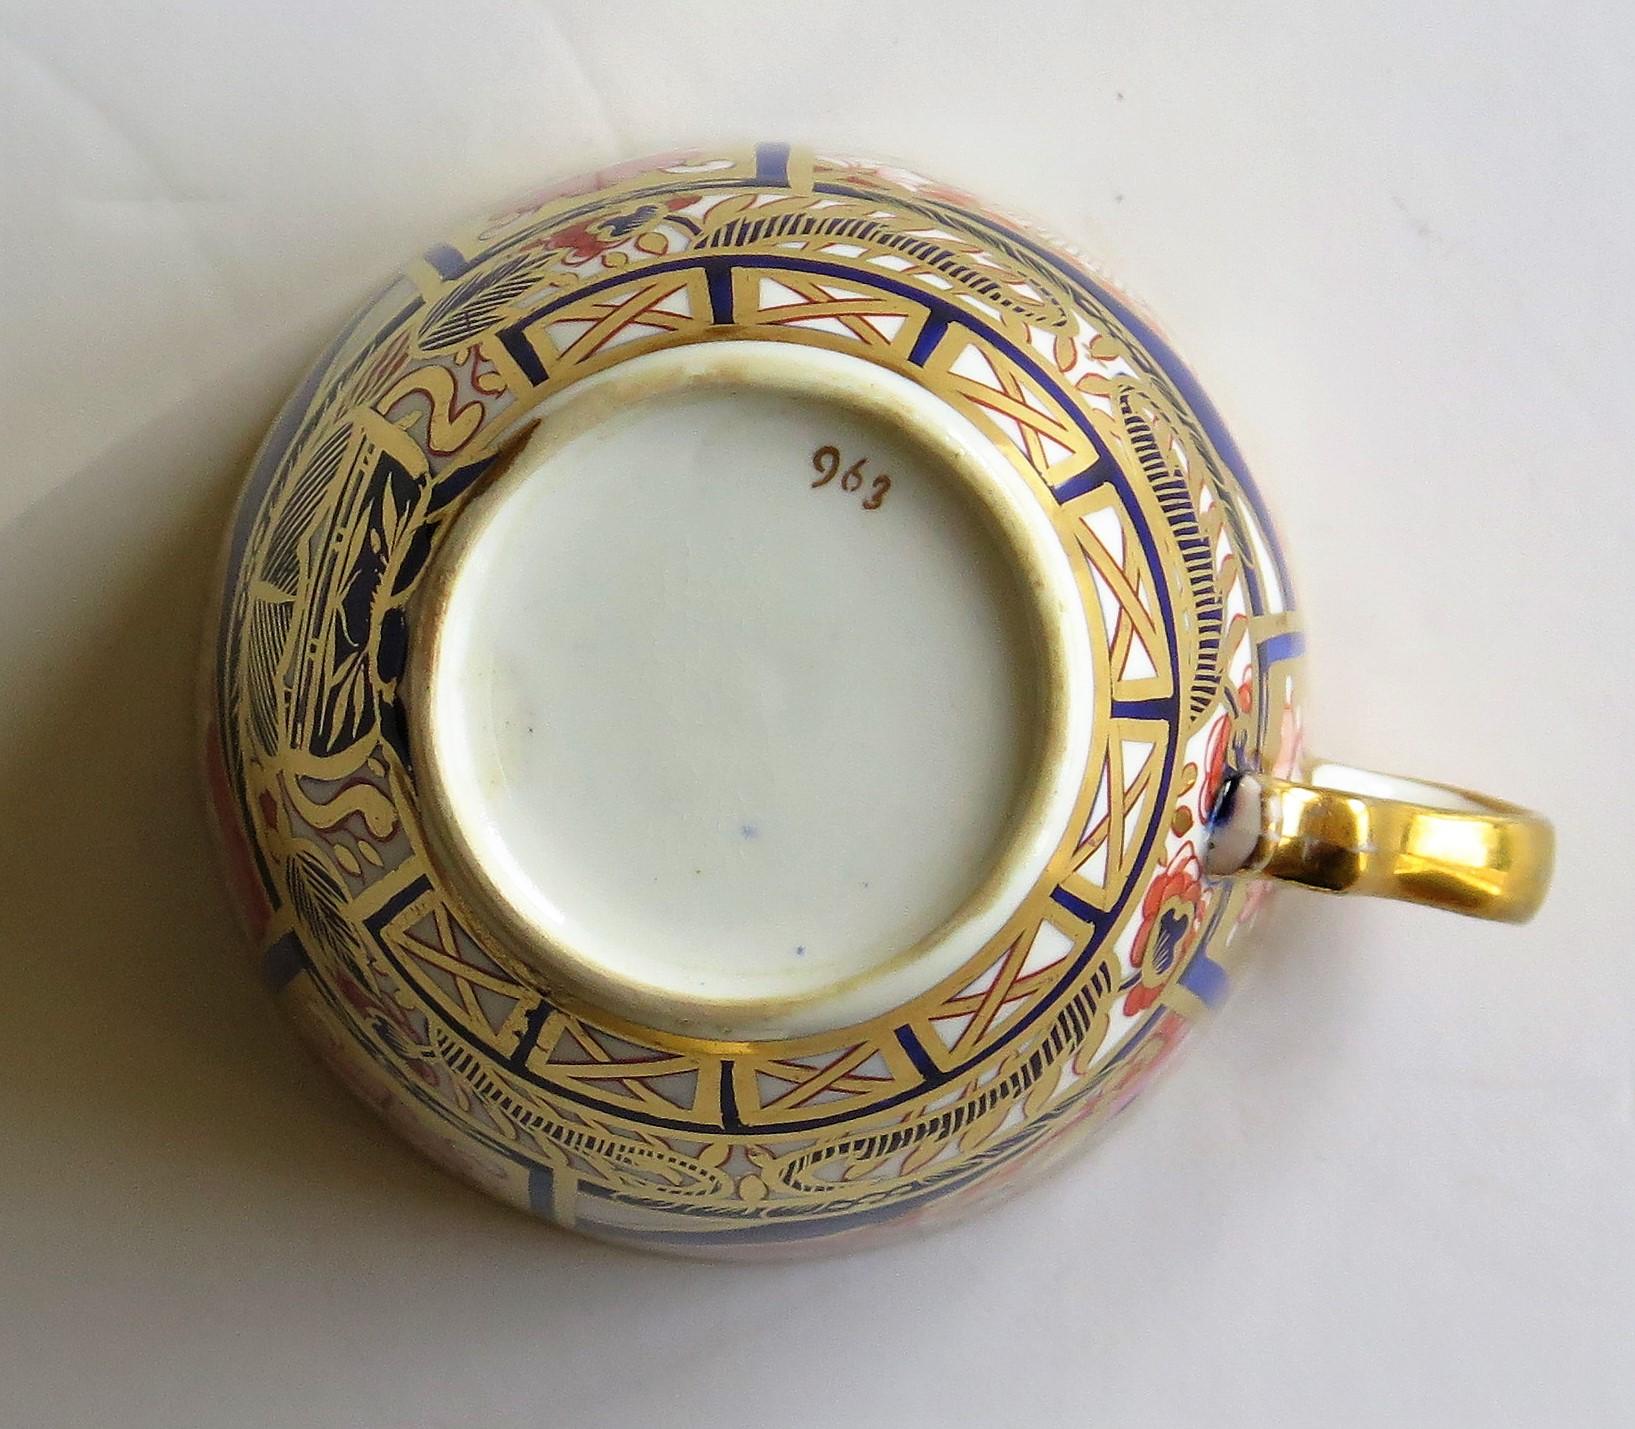 Early Spode Porcelain Tea Cup Heavily Gilded Pattern 963 Hand Painted 8